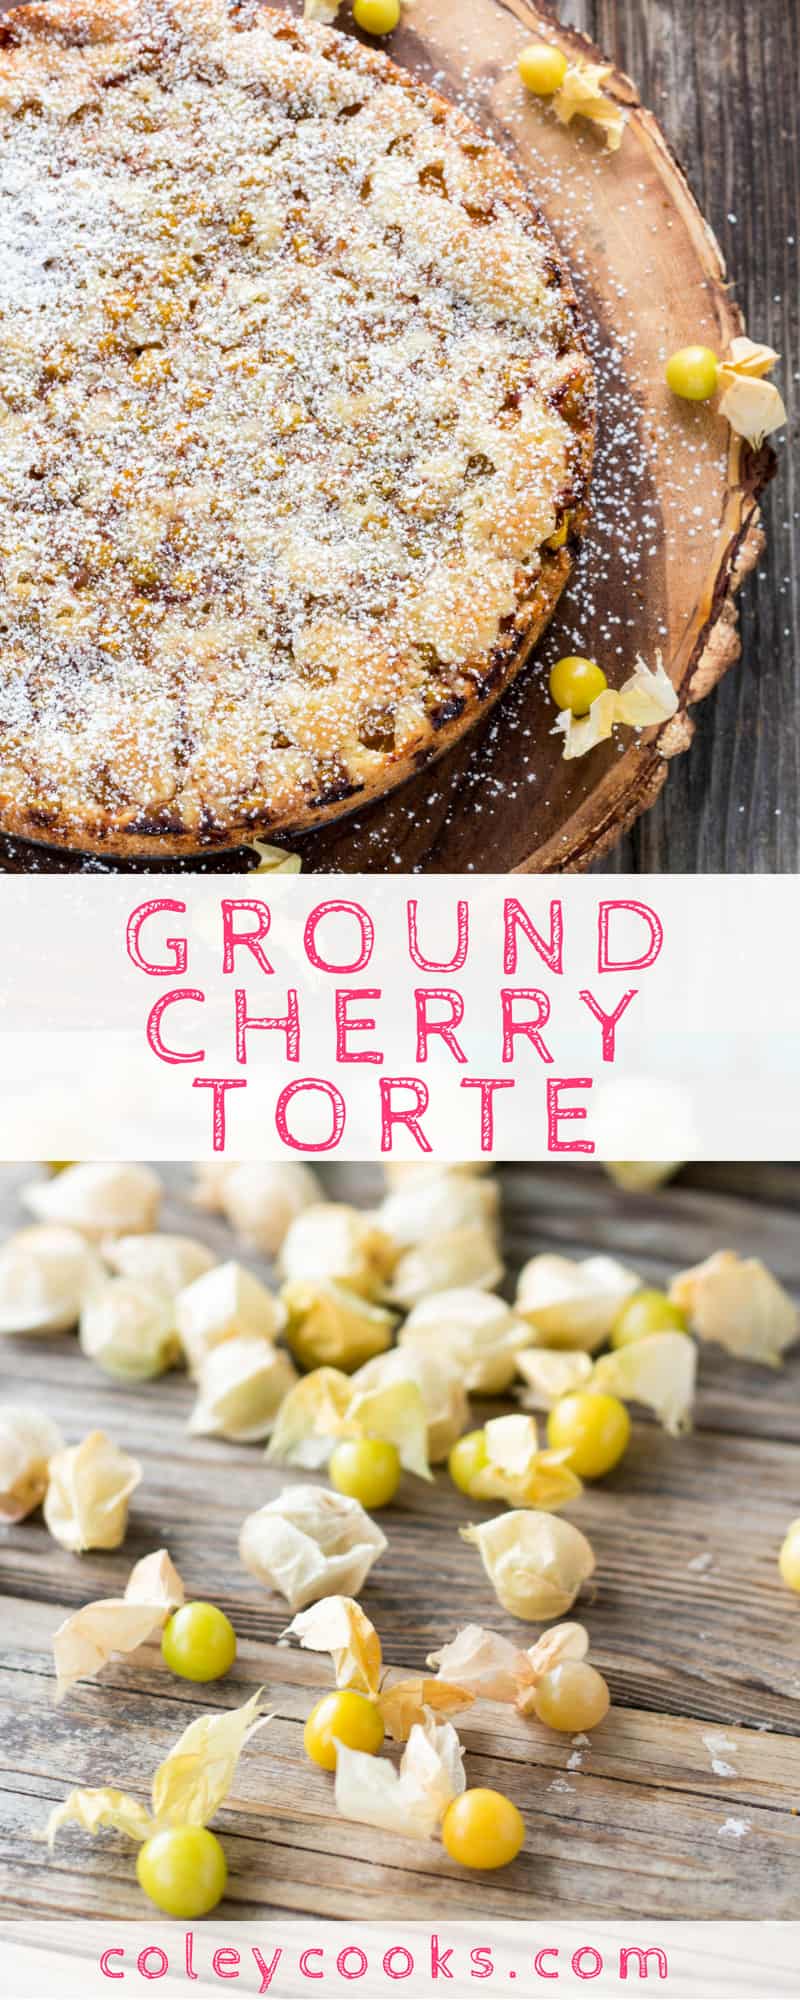 GROUND CHERRY TORTE | This easy cake recipe uses ground cherries aka husk cherries or gooseberries! It's dense and moist and absolutely delicious #easy #groundcherries #gooseberries #cake #recipe | ColeyCooks.com